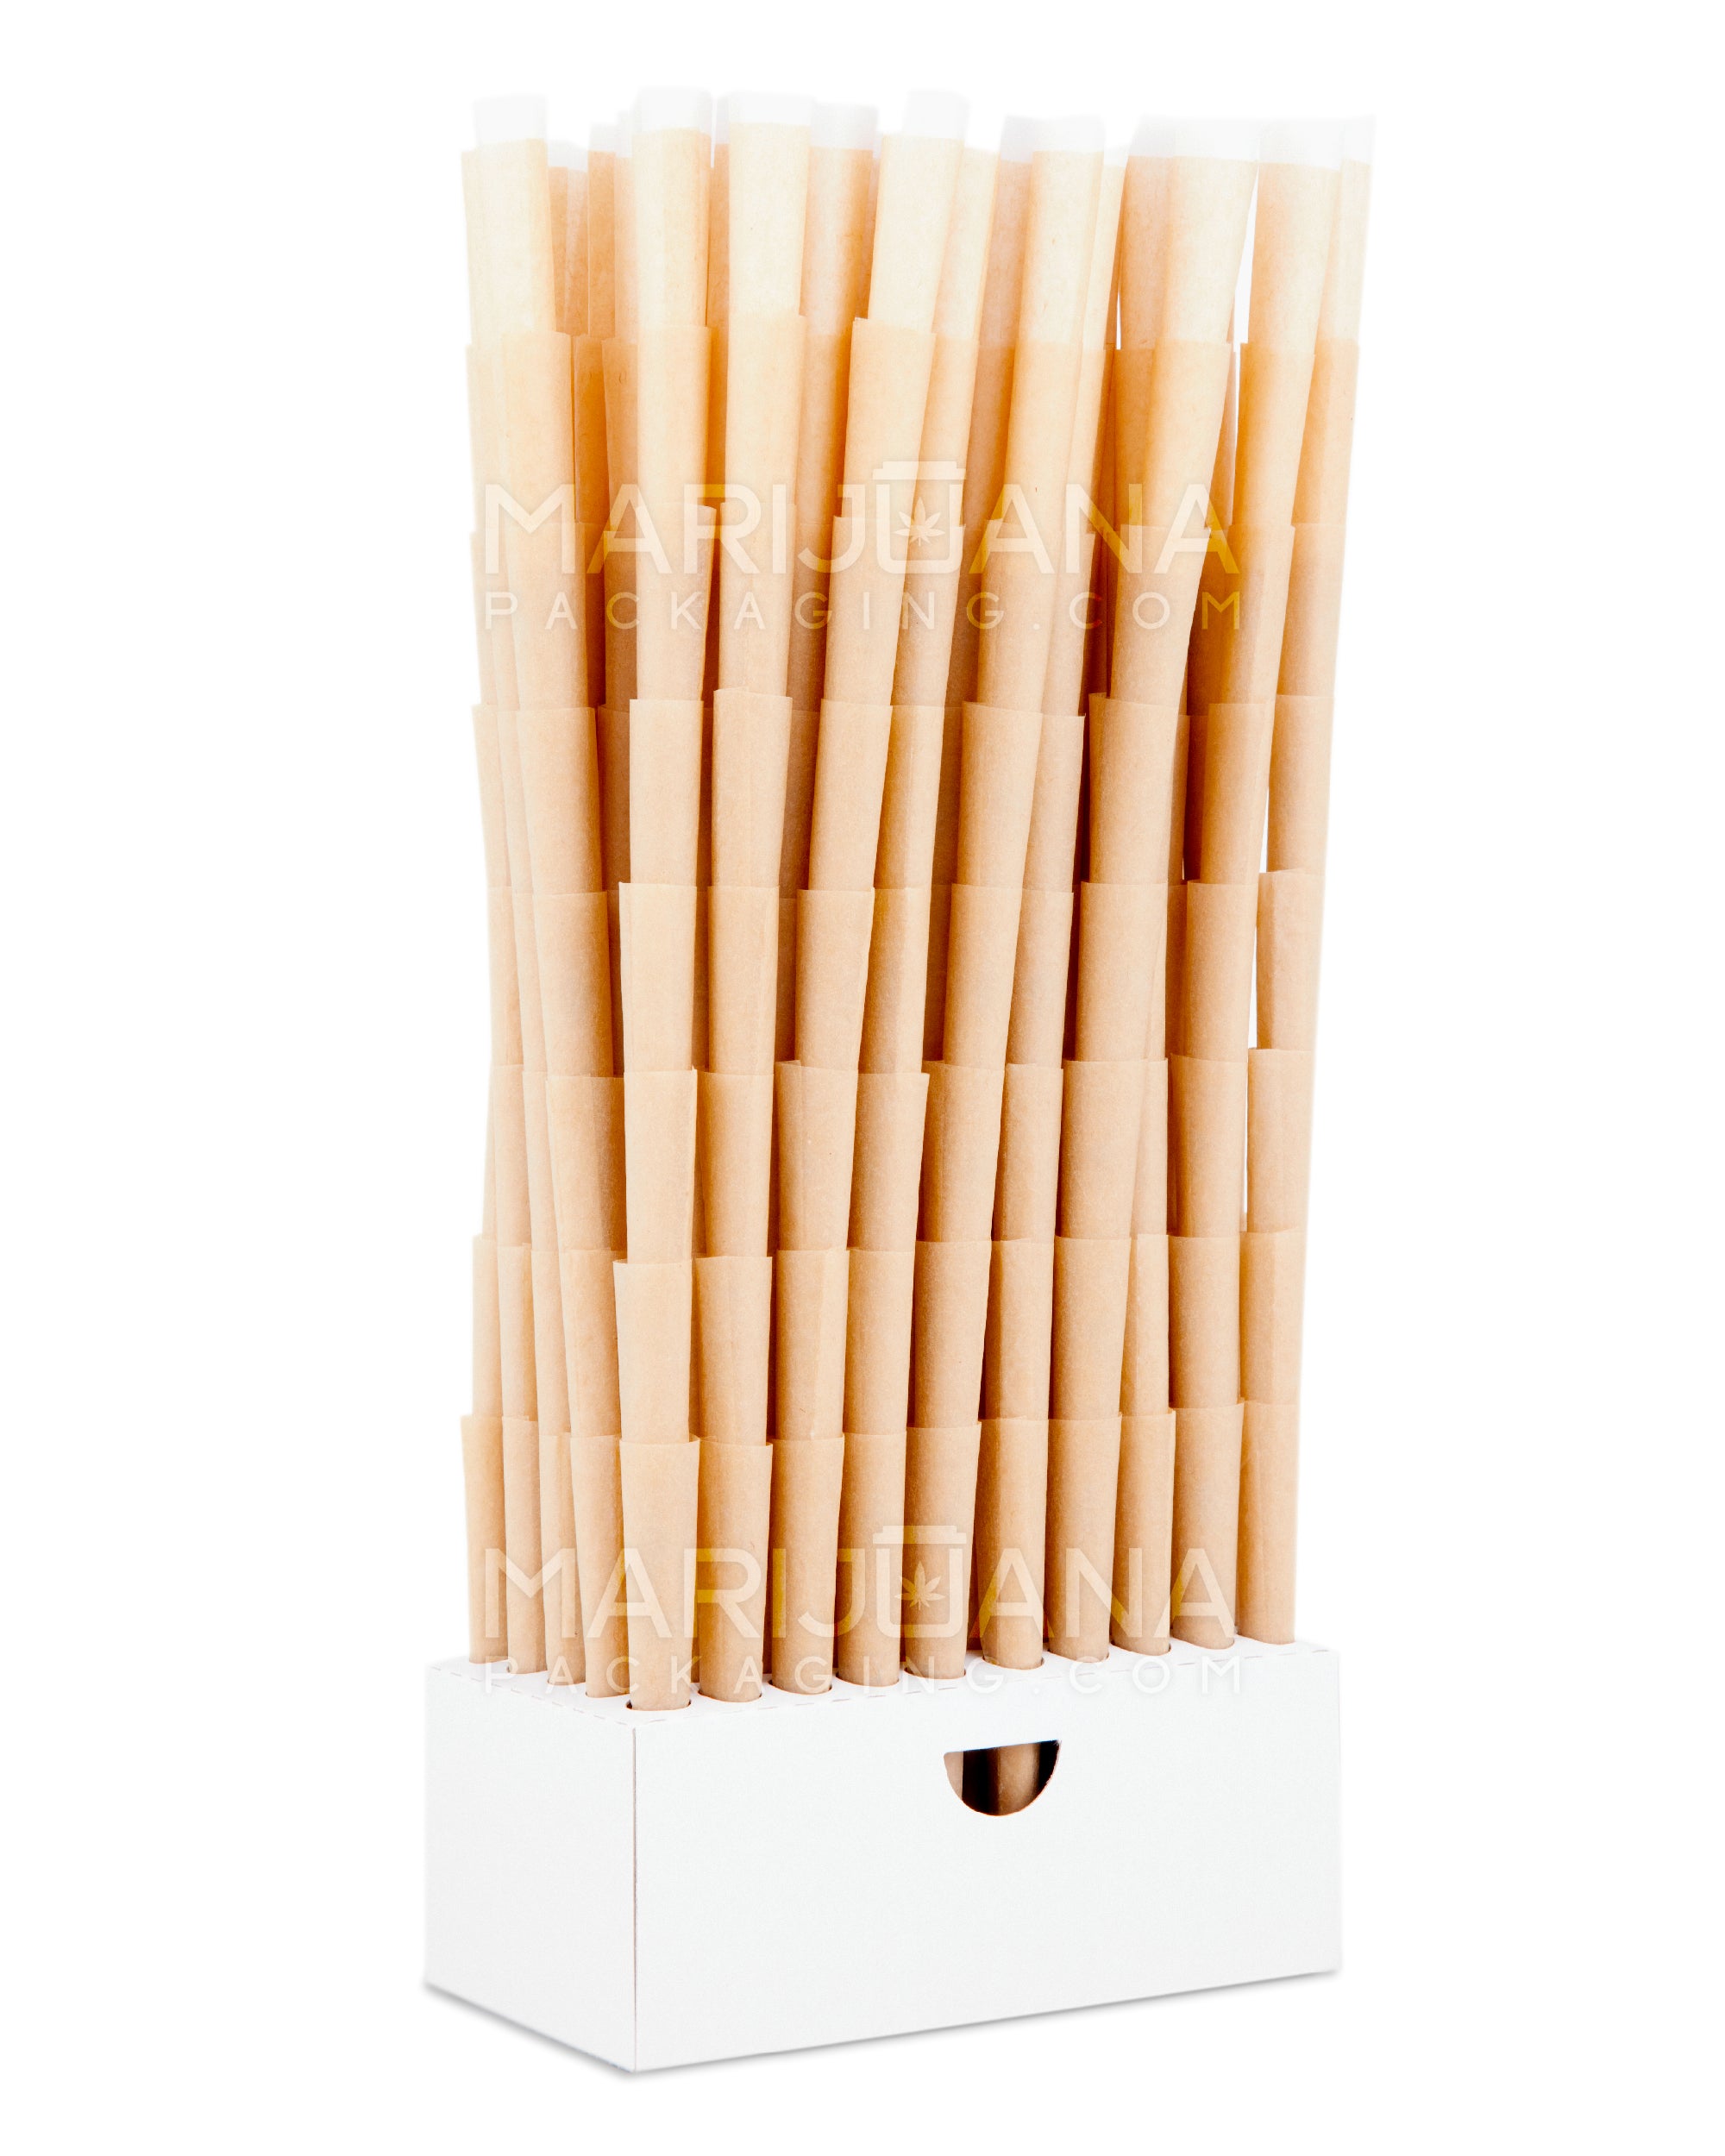 POP CONES | 1 1/4 Size Unbleached Pre-Rolled Cones | 84mm - Banana Cream - 400 Count - 3